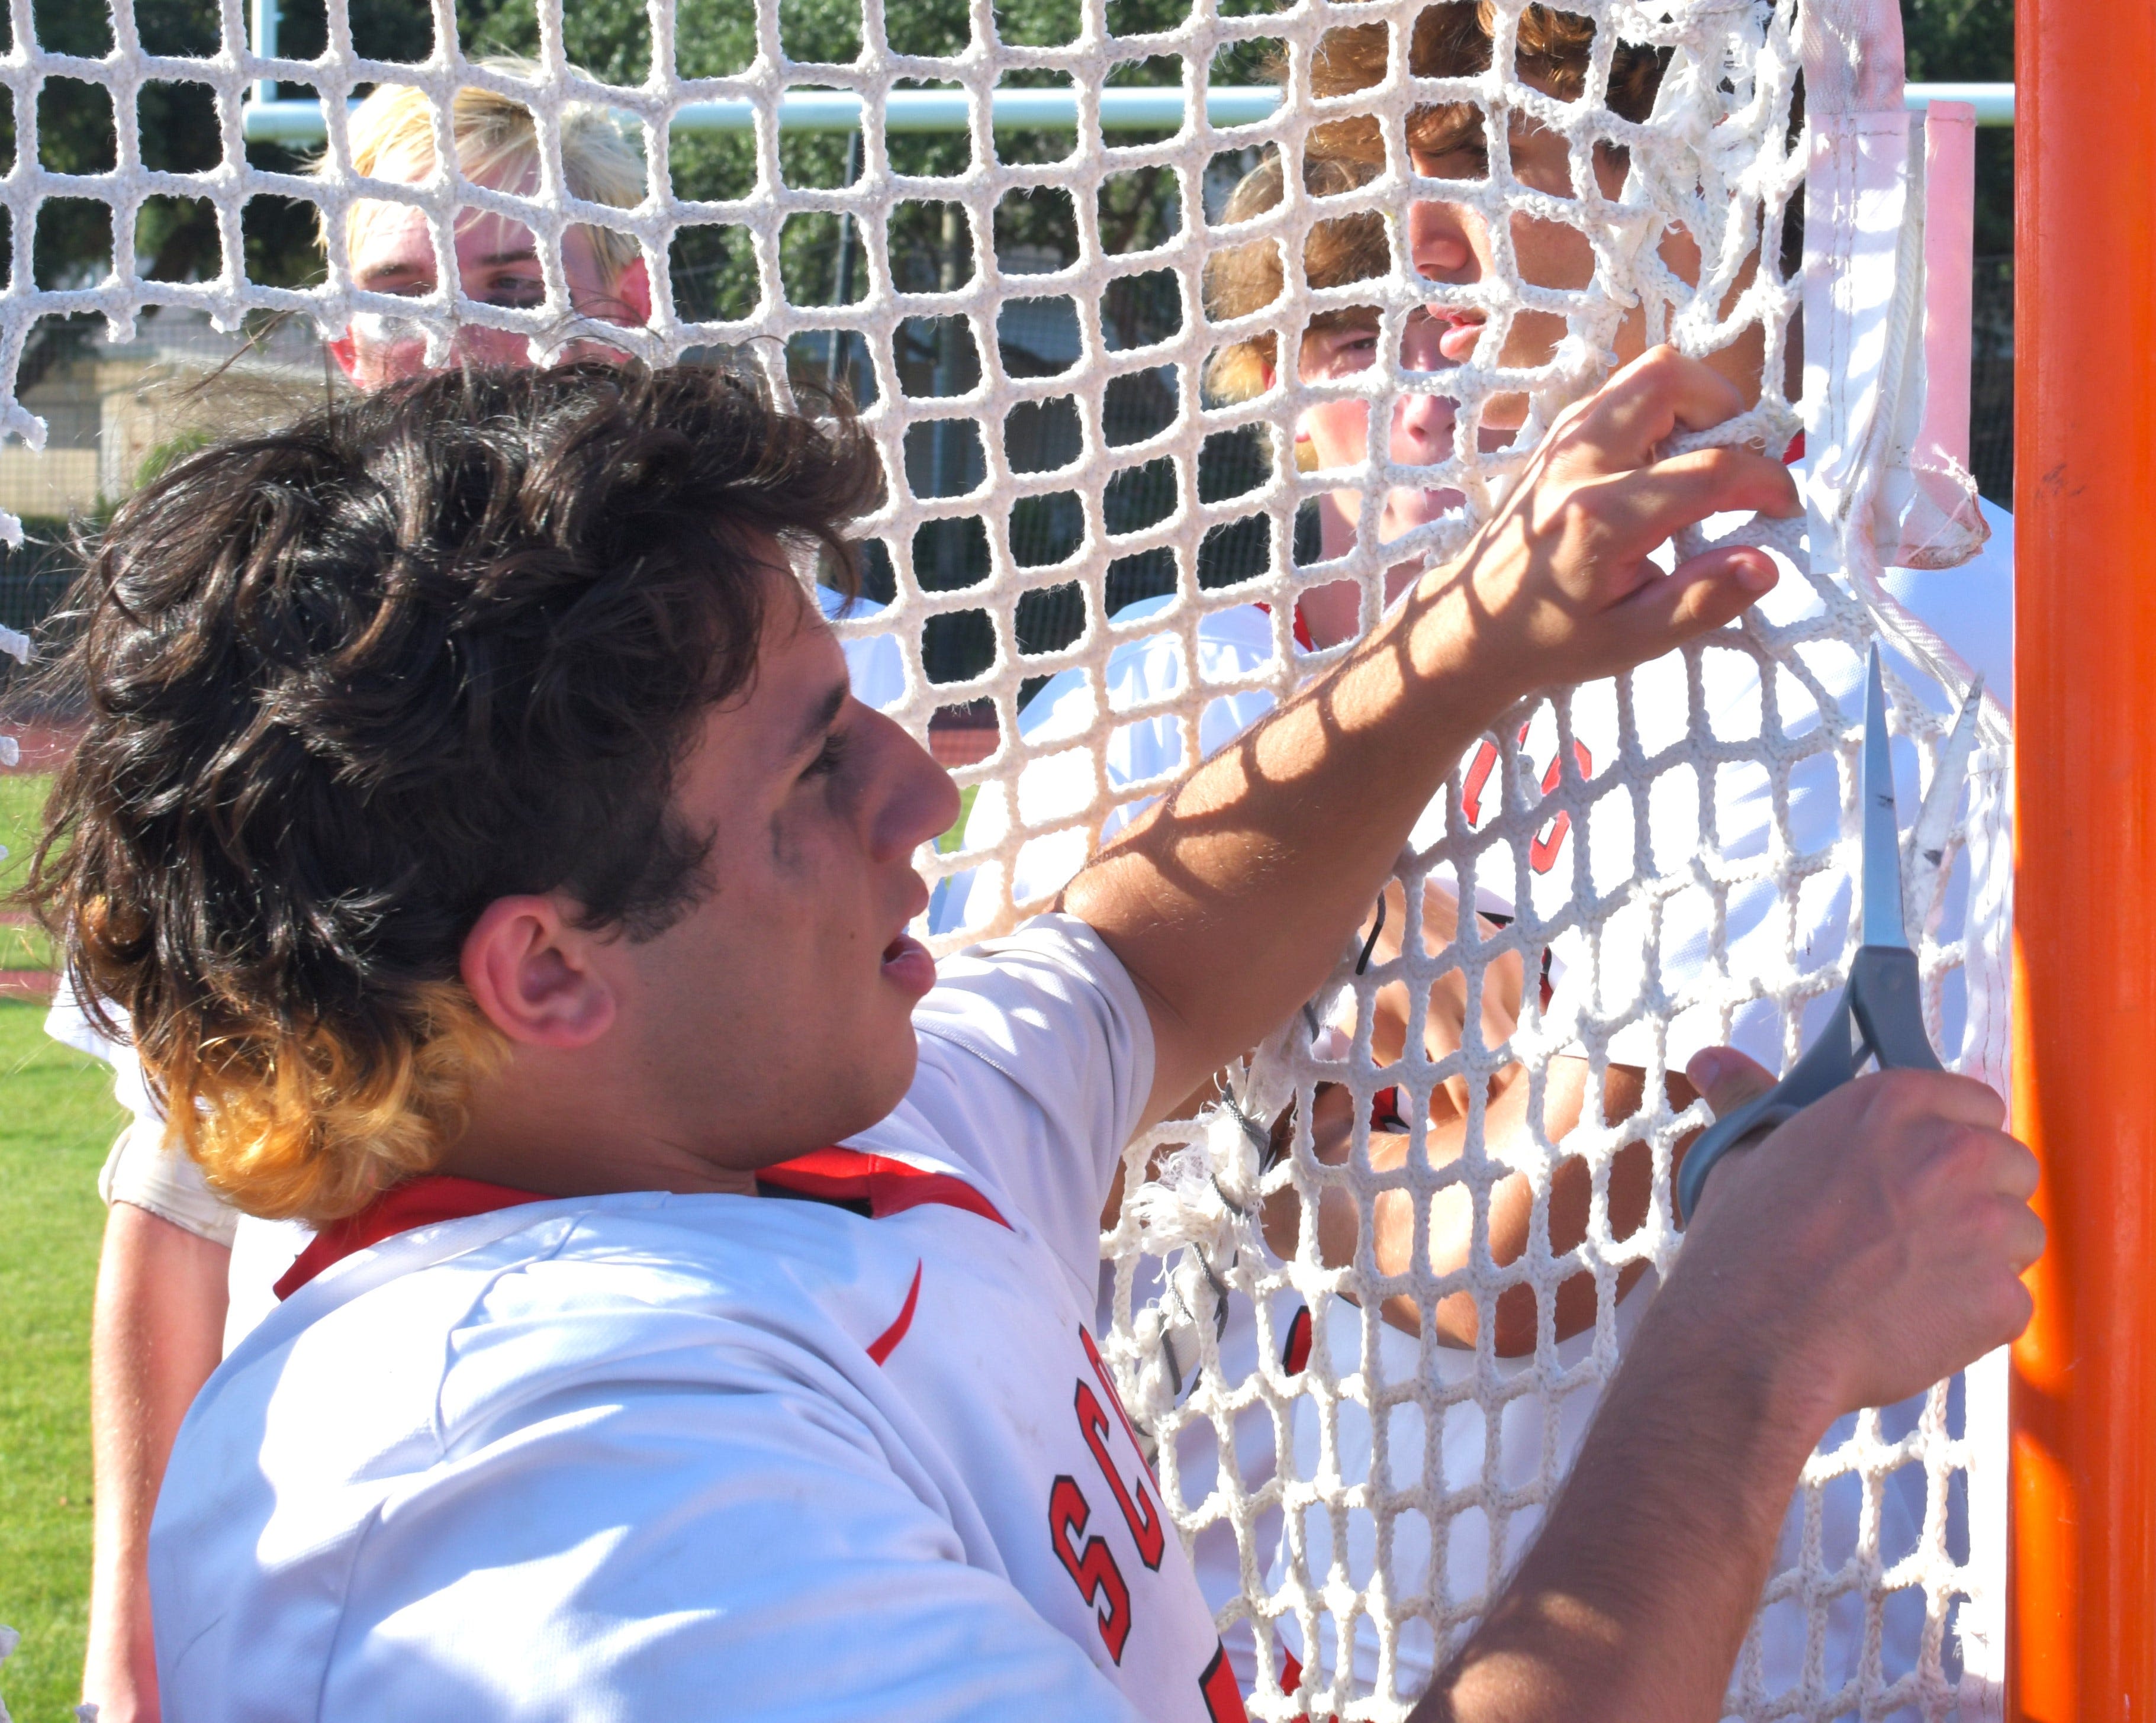 States-bound: Which local lacrosse teams are headed to Naples?